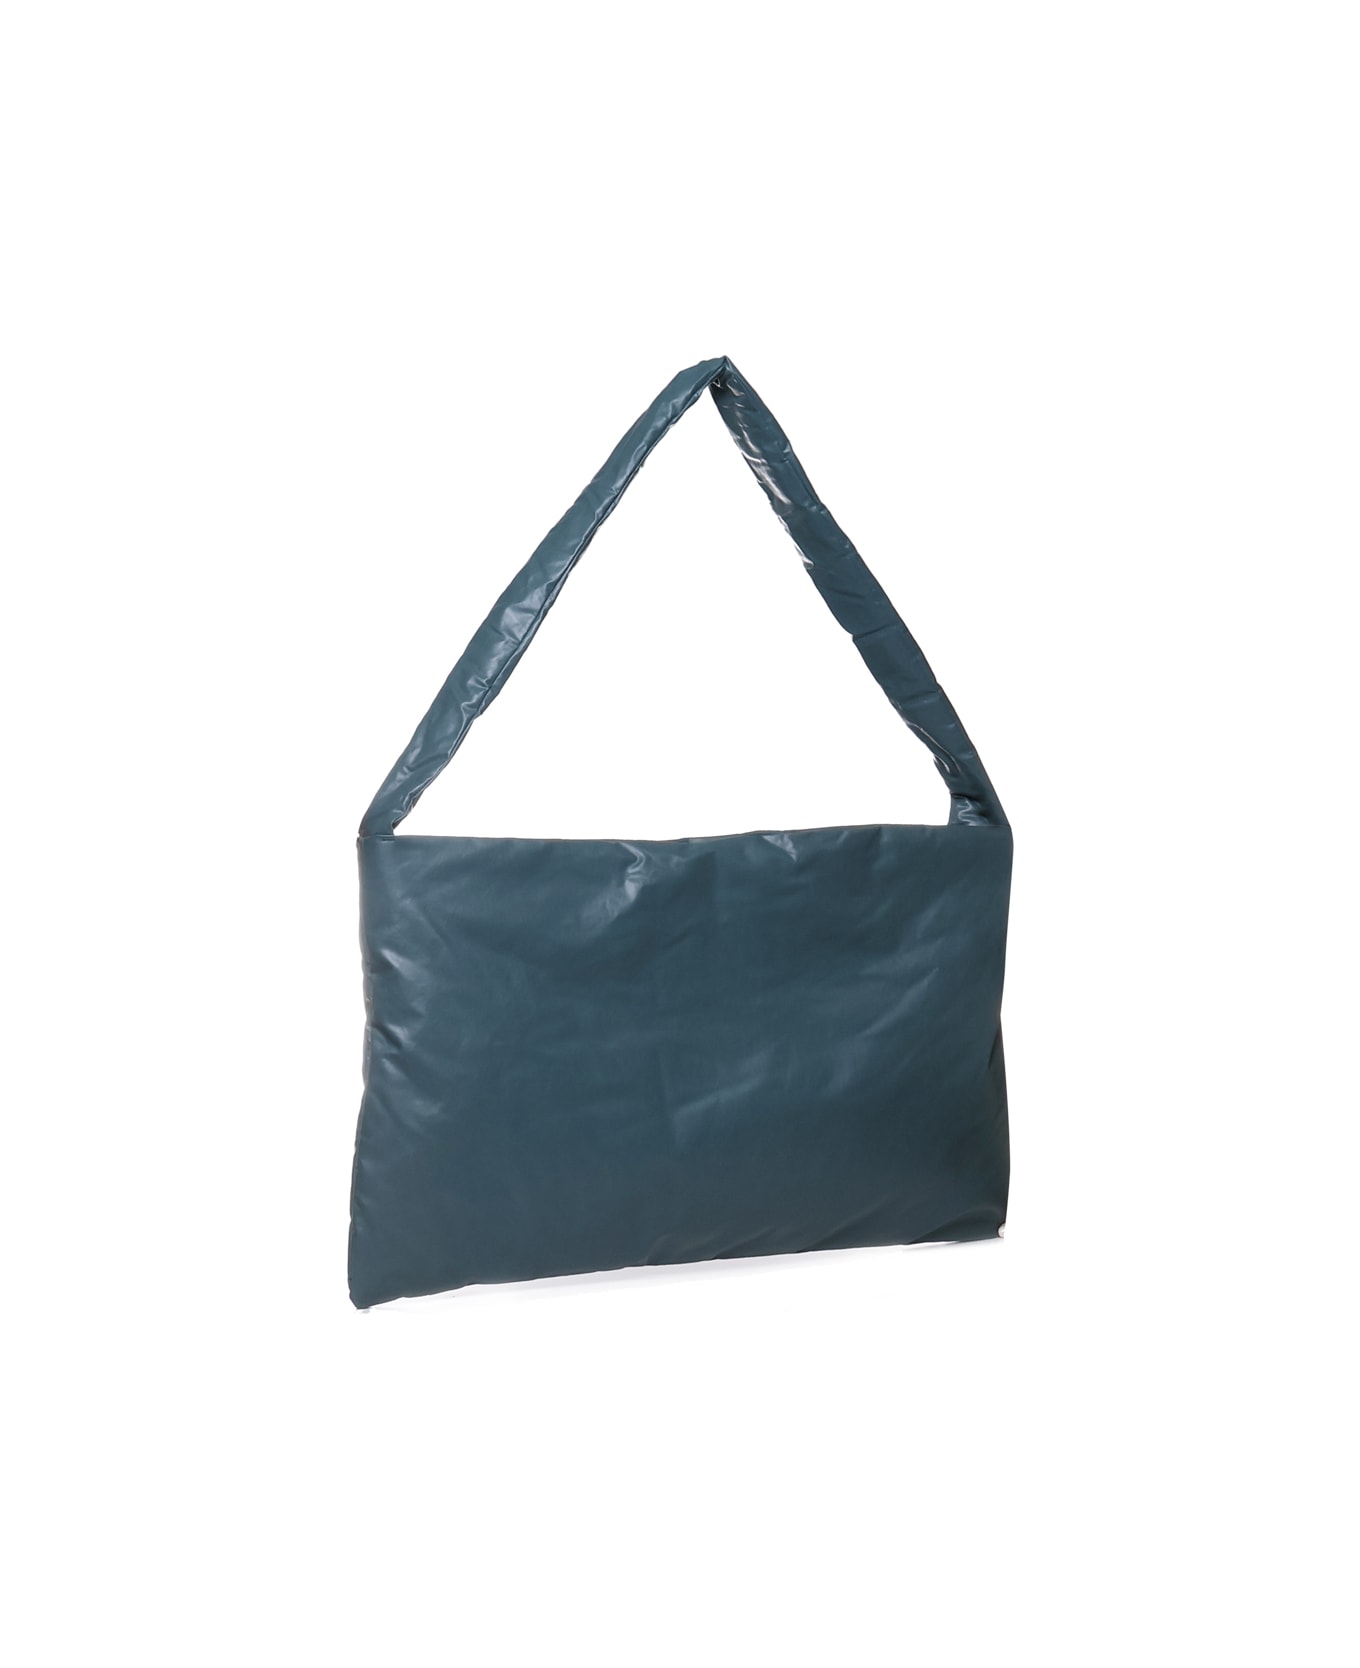 KASSL Editions Oil Square Bag - Oil forest